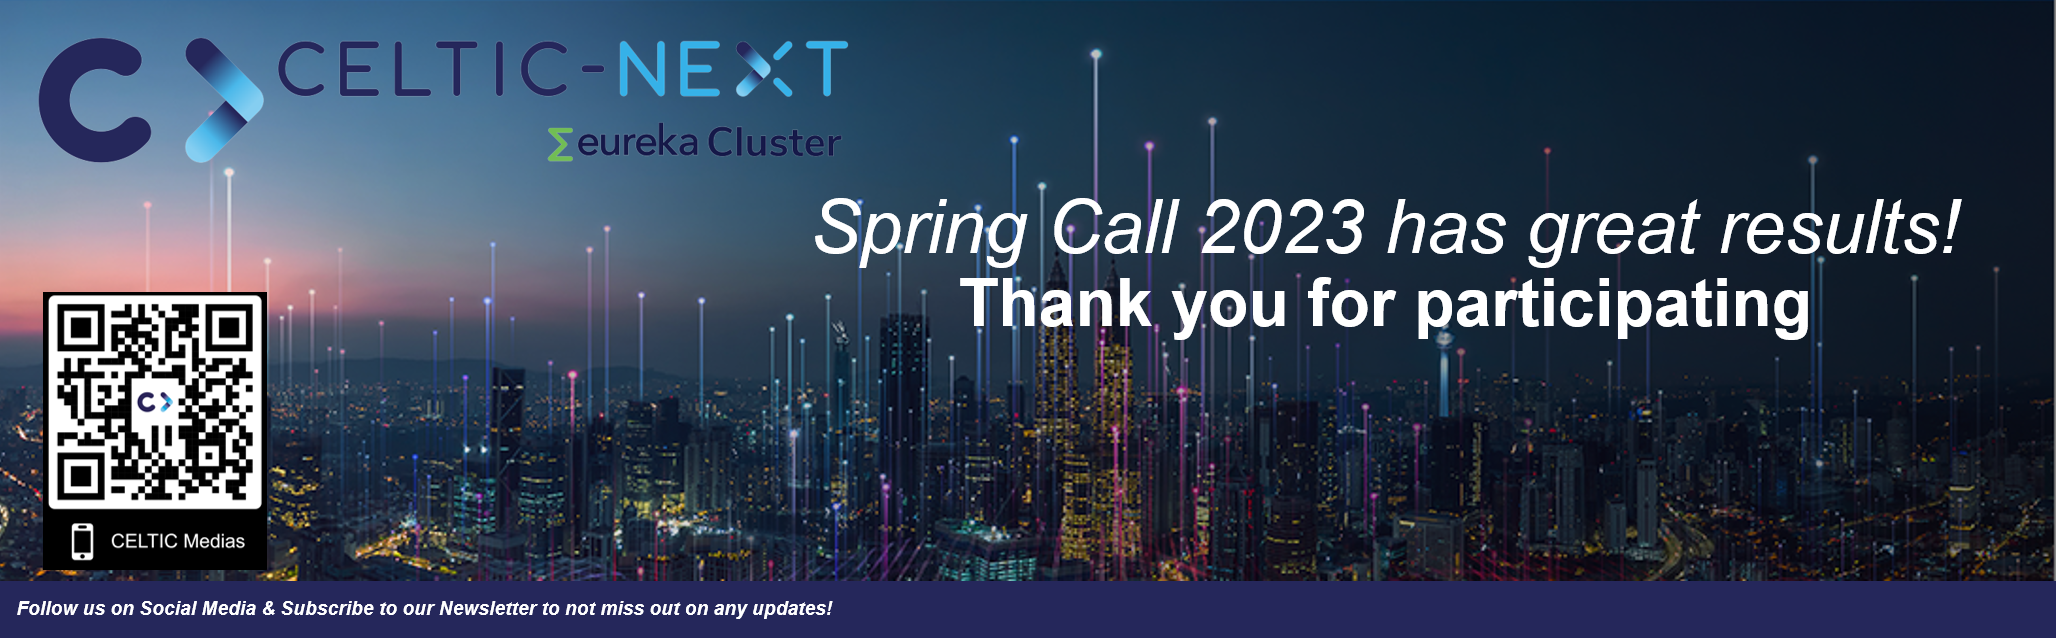 spring-call-2023-great-results